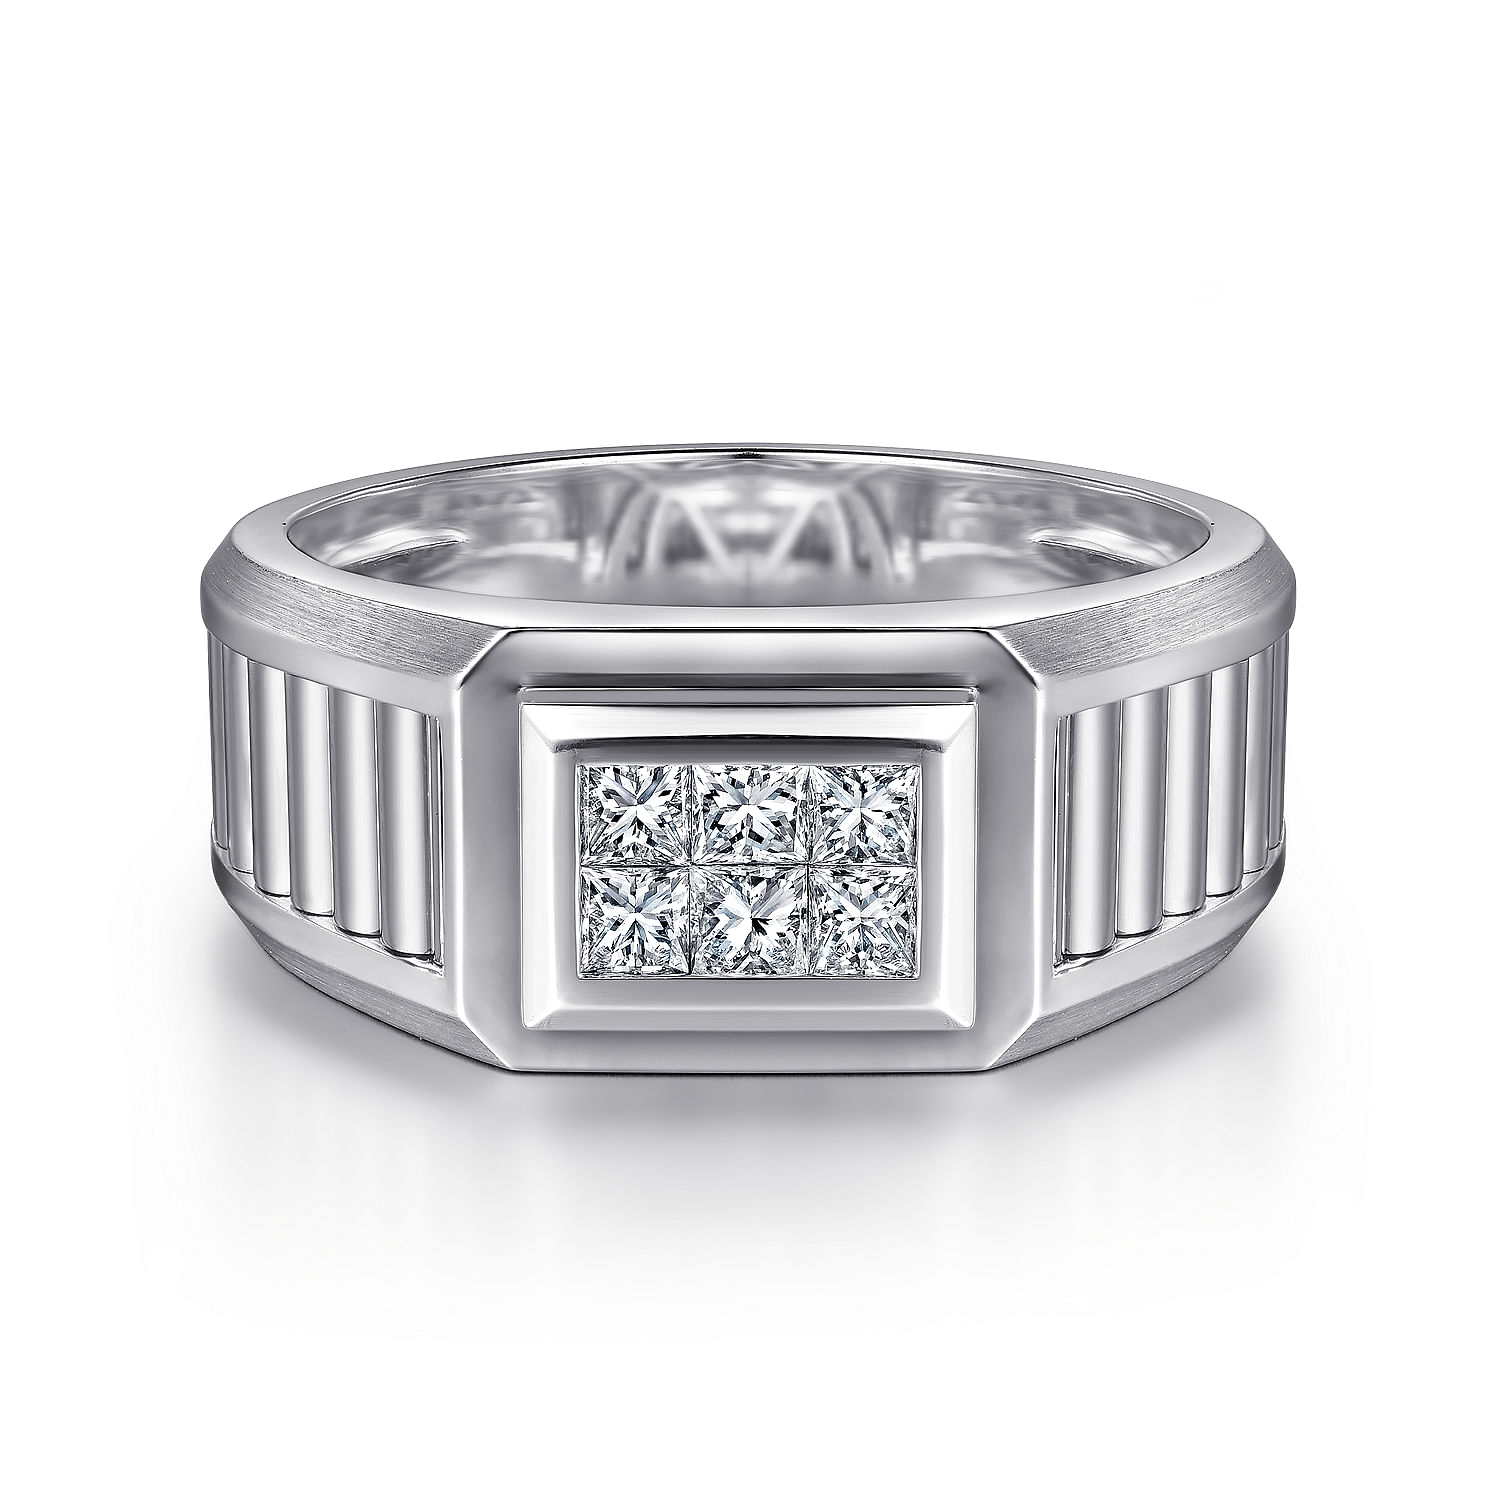 14K White Gold Diamond Mens Ring in High Polished Finish